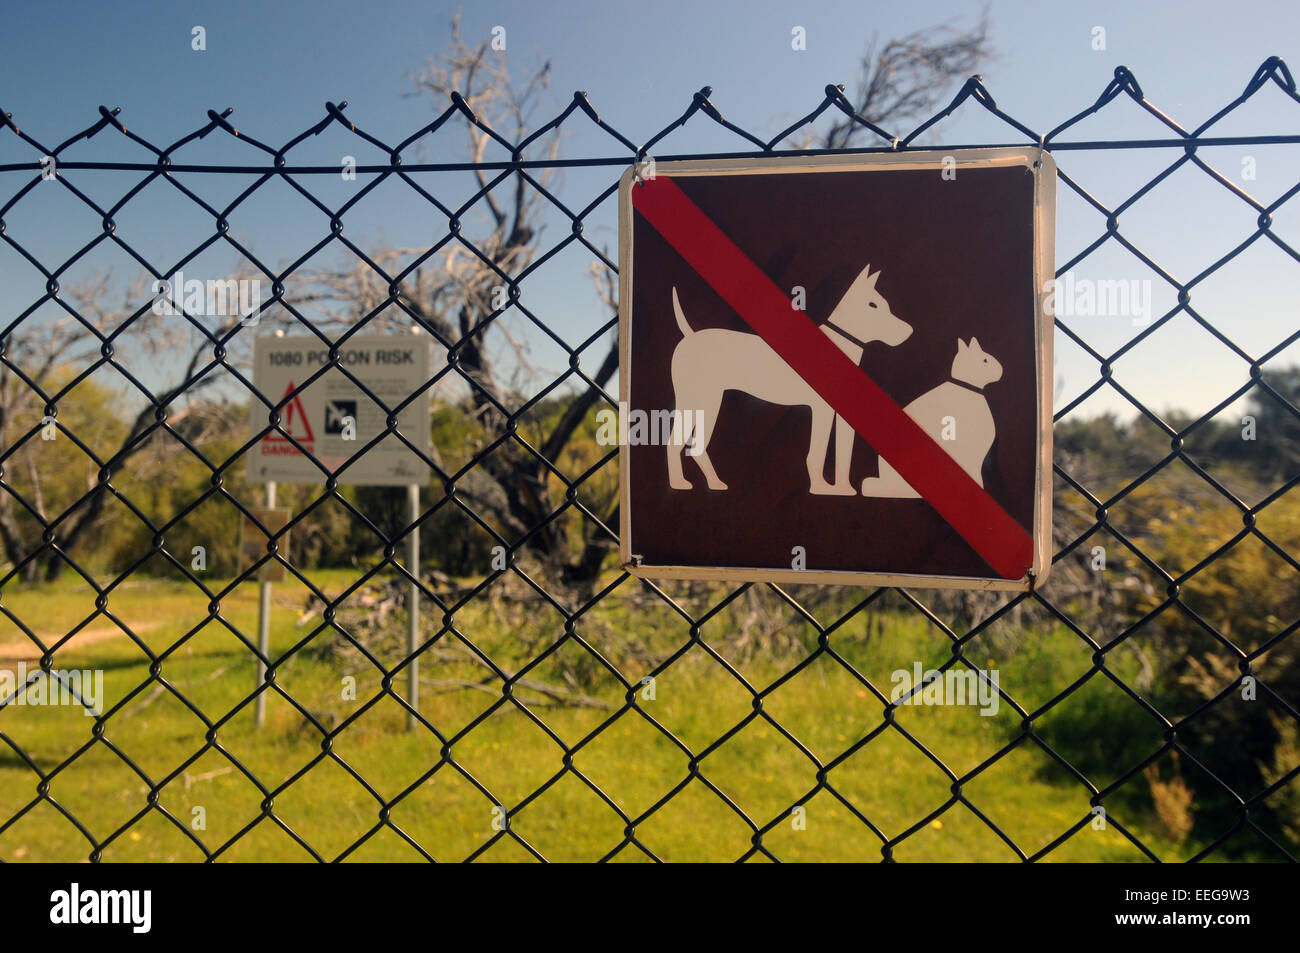 Security fence around coastal wetland to prevent incursions by cats or dogs, with 1080 baiting, Mandurah, Western Australia Stock Photo